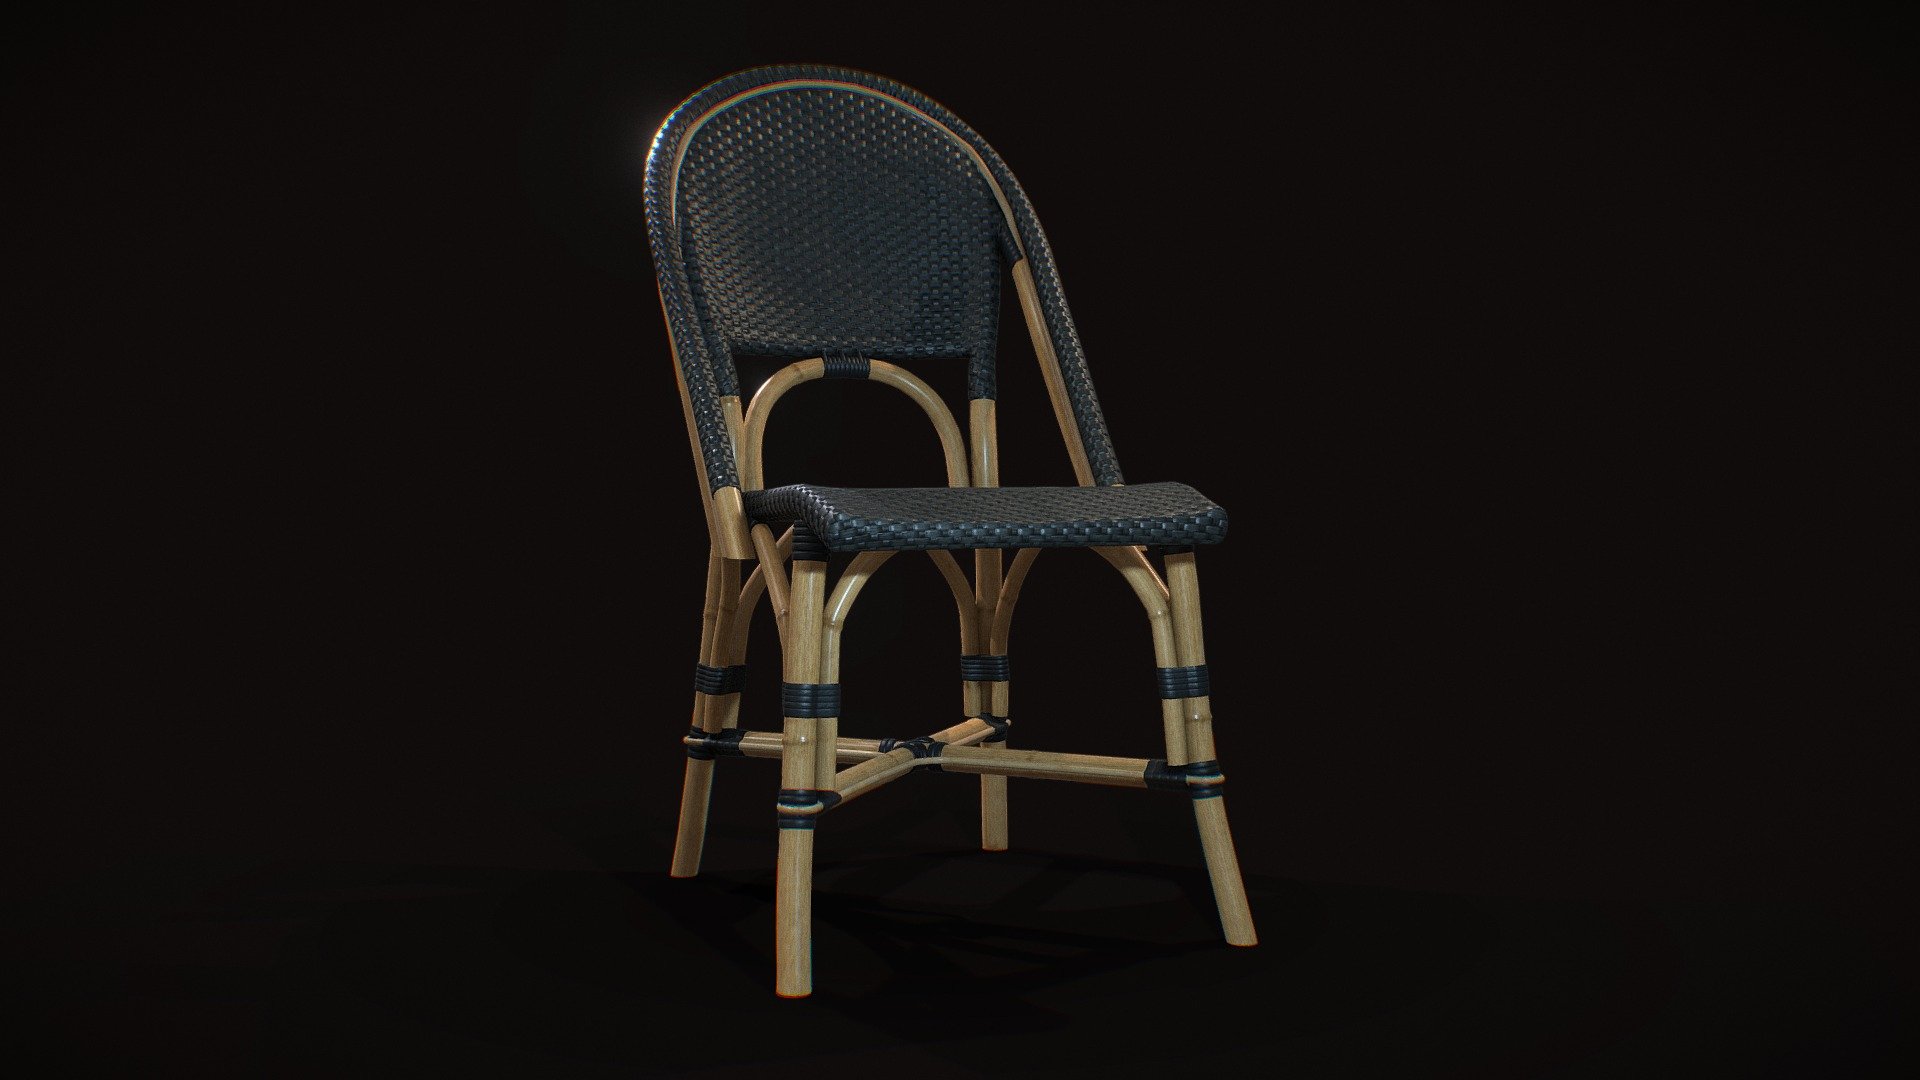 3d model of a dining chair for using in decoration in arch-viz. The model was created in latest version of Blender and textured in Substance Painter. It is in real proportions.

High resolution of textures.

Metalnessworkflow- BaseColor, Normal, Metalness,Height, Ambient Occlusion and Roughness Textures - PNG 3d model